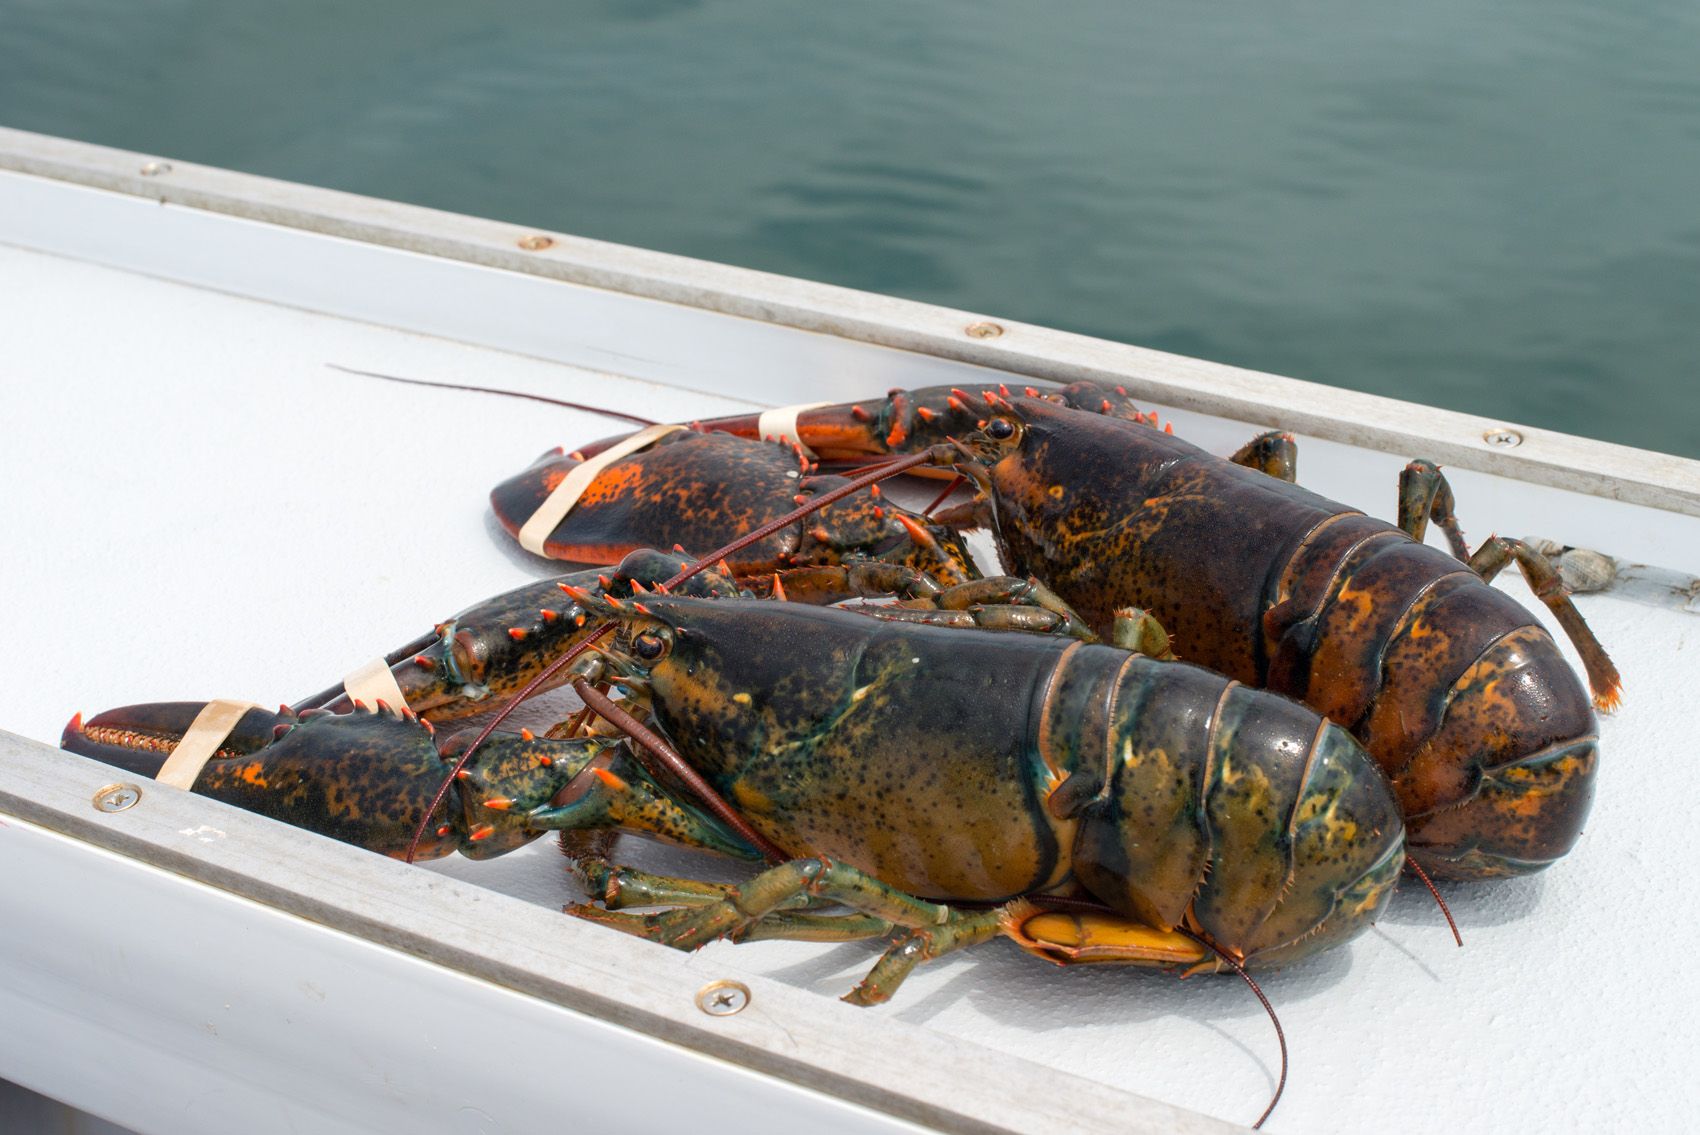 Lobsters on the Boat